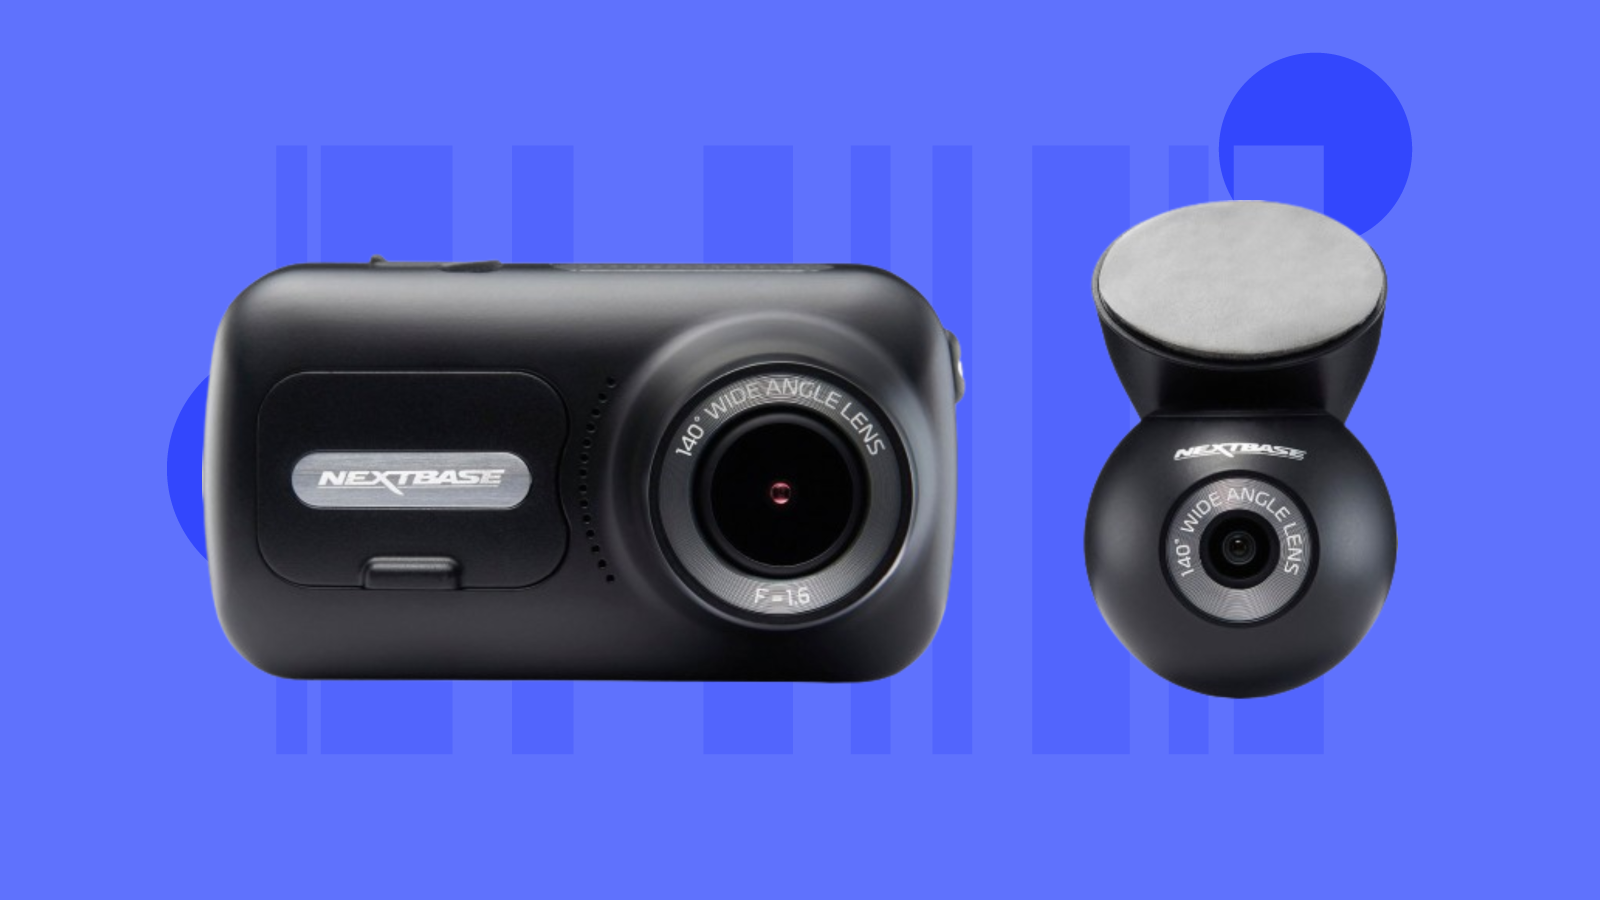 Best Dash Cam Deals: Basic Cams, 4K Models and More From $25 - CNET